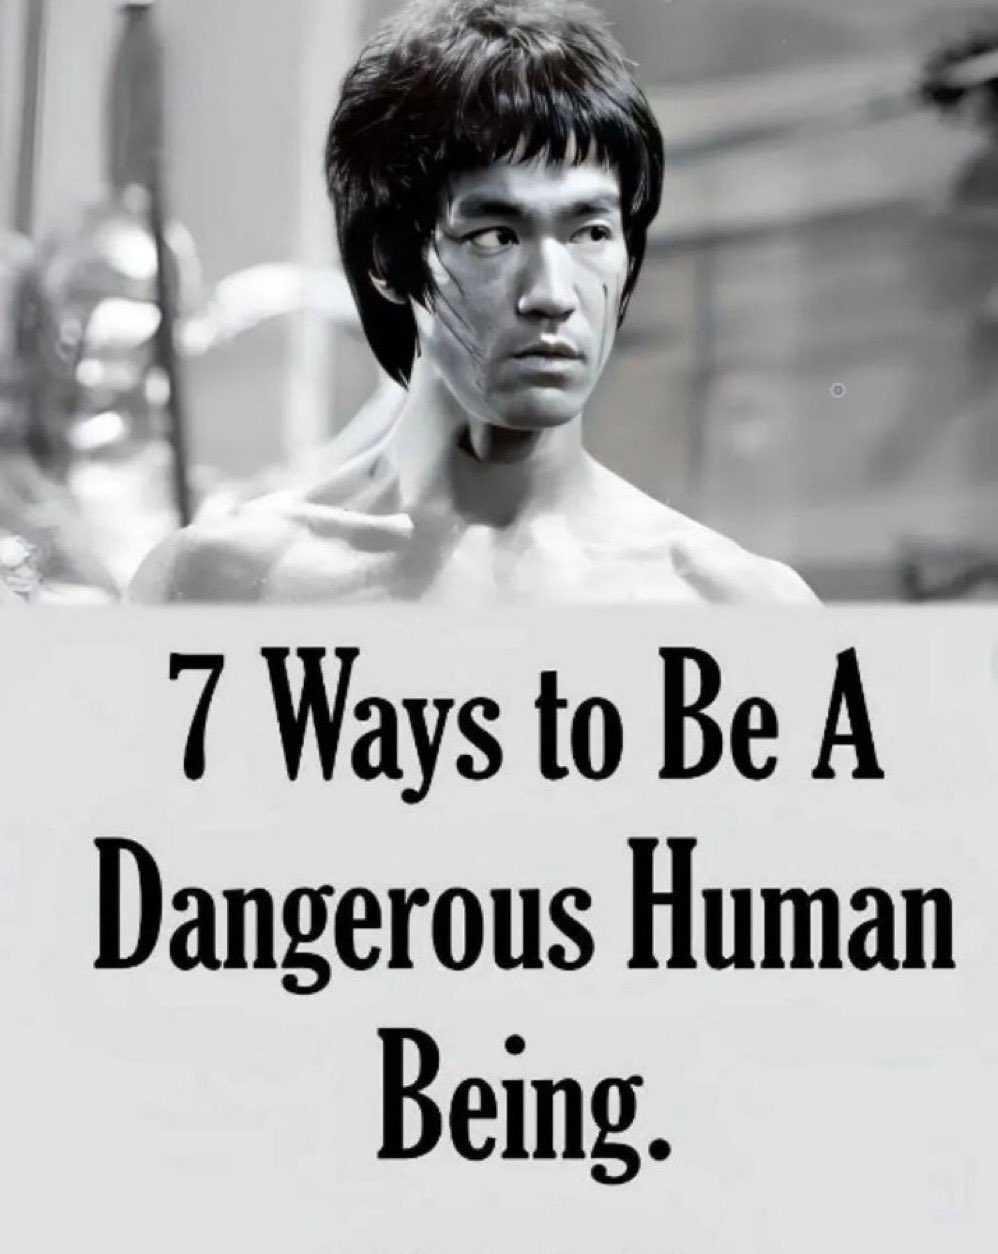 7 Ways to Be a Dangerous Human Being...